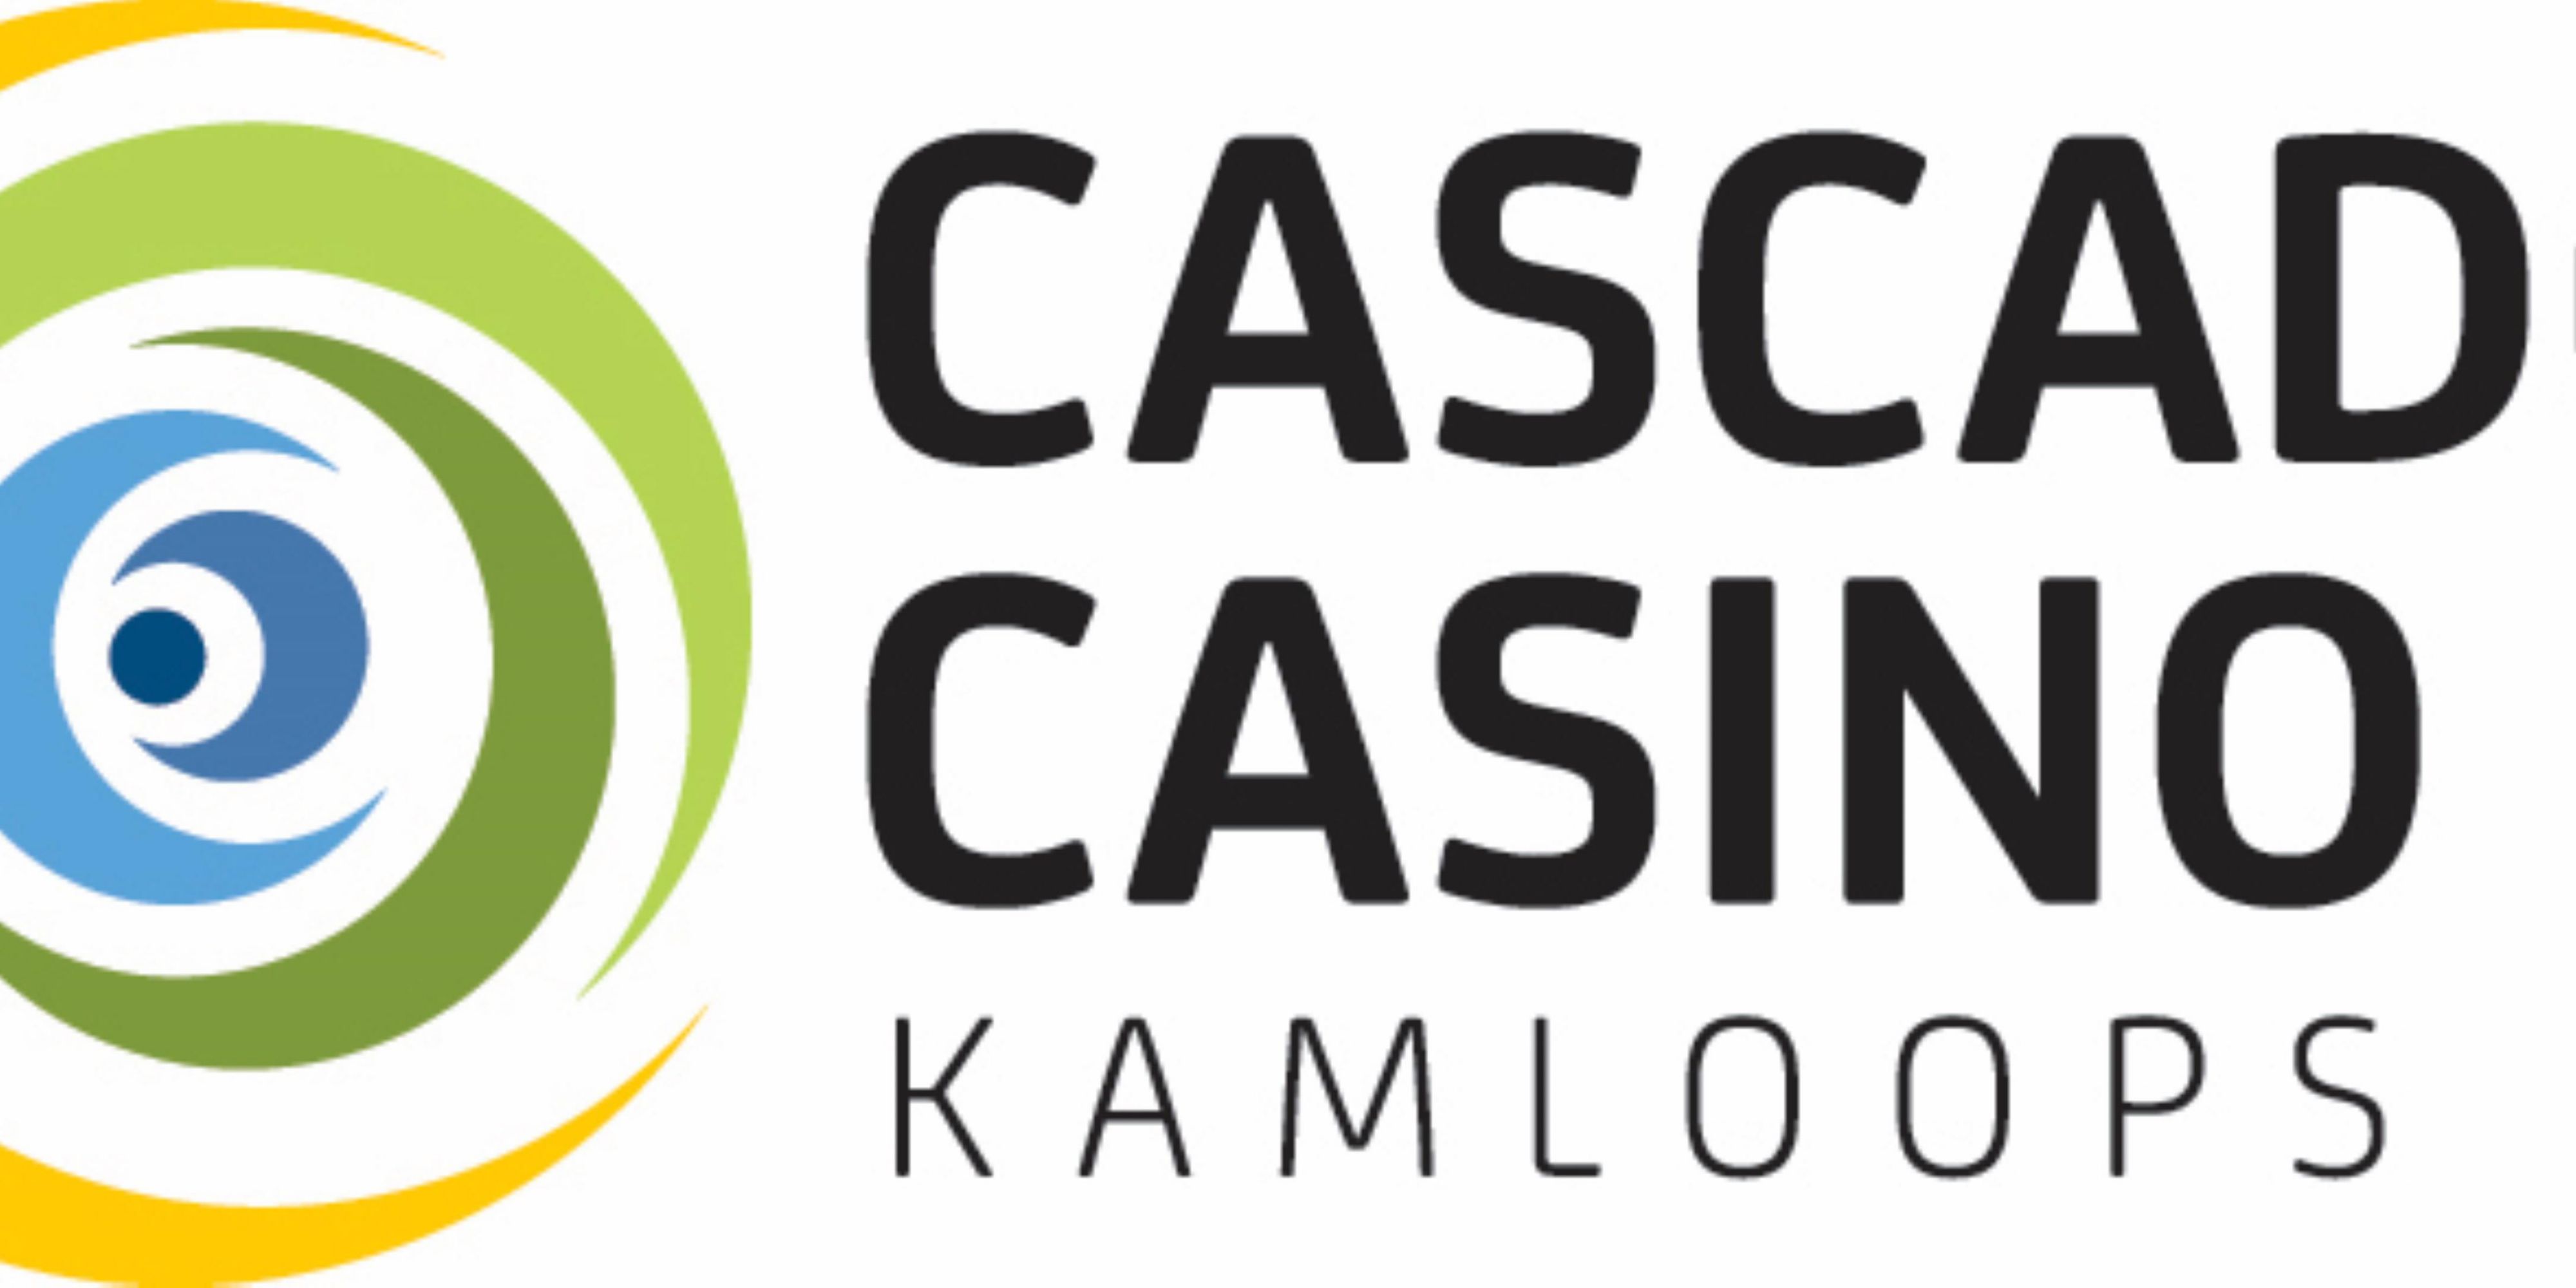 We are located across the street from the Cascades Casino. Our Stay & Play package includes a 20-dollar gift card to Match Eatery and Public House and a 20-dollar play card at the Cascades Casino. This is a 40-dollar value for only 10 dollars. Offer also includes free breakfast and parking at the hotel.